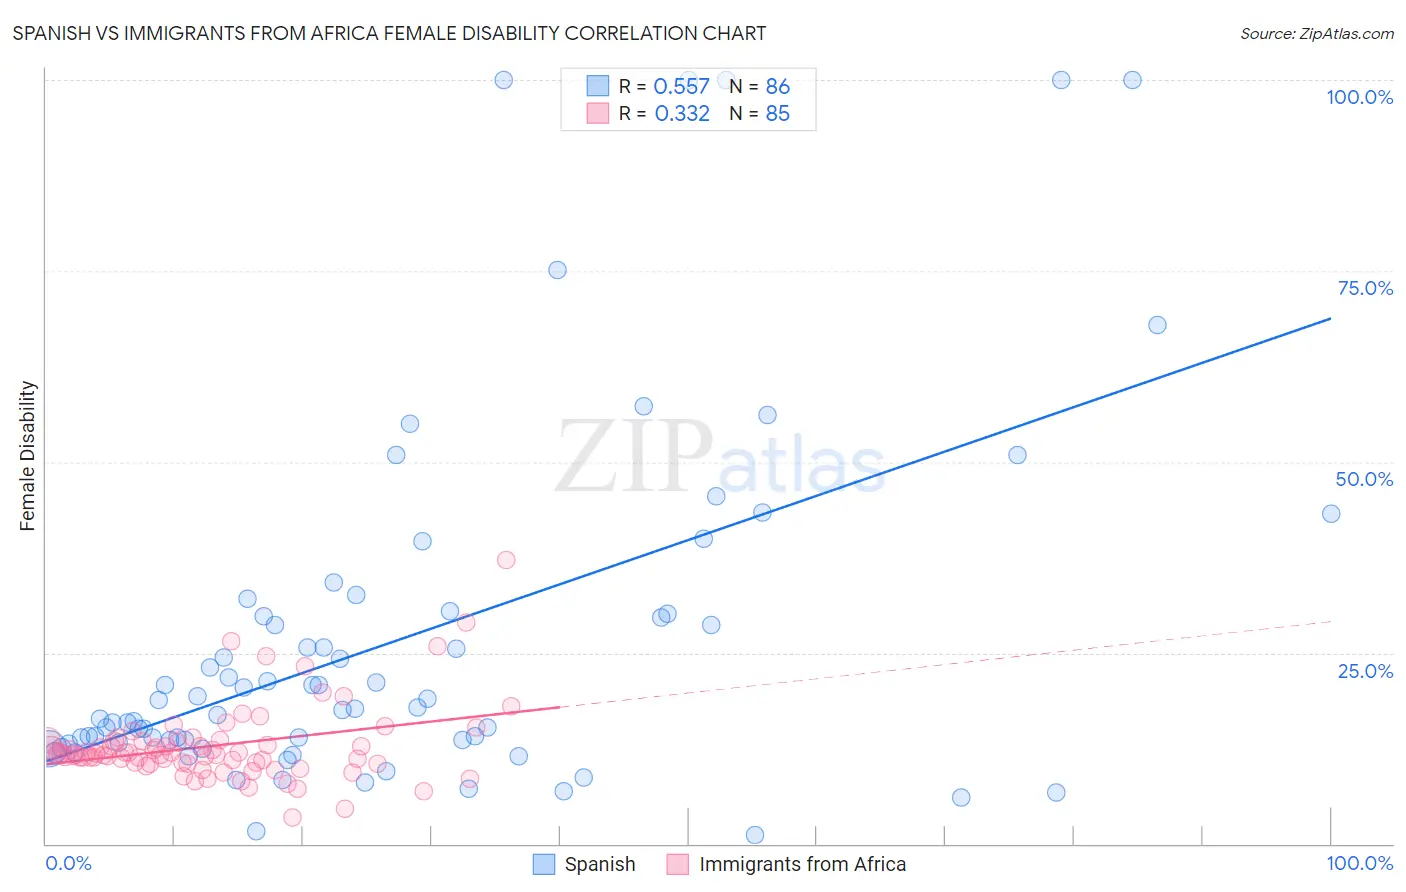 Spanish vs Immigrants from Africa Female Disability